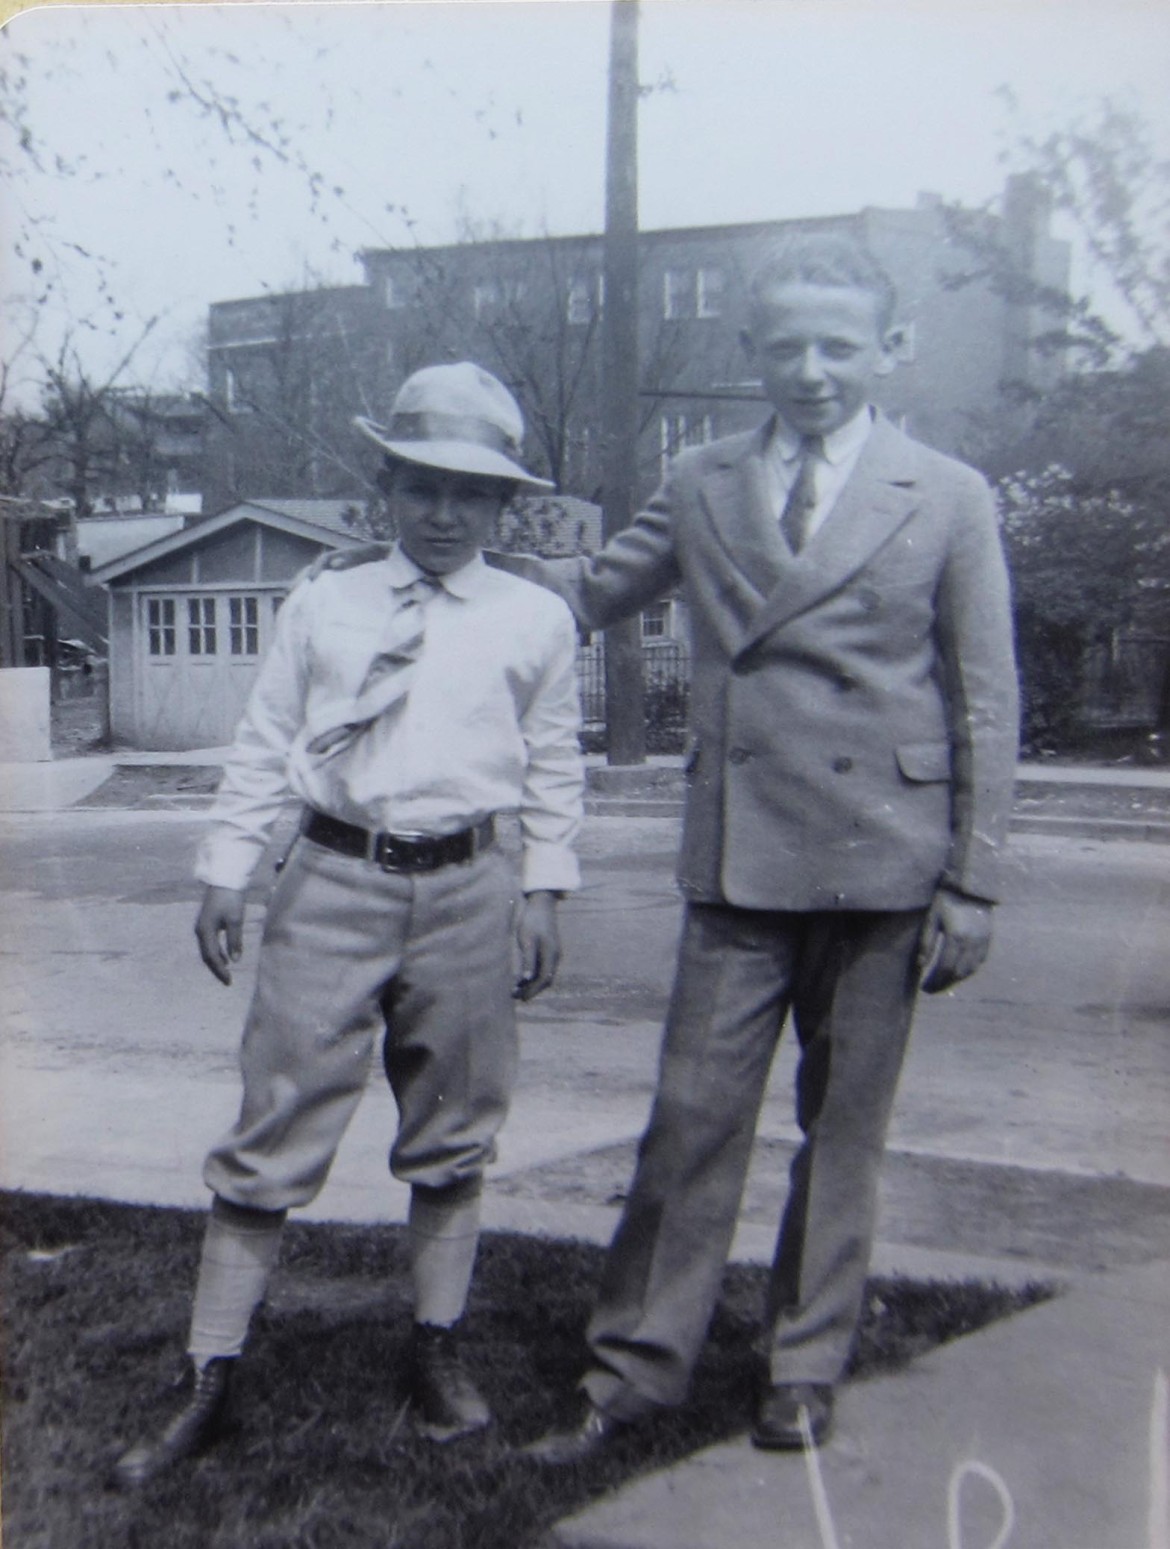 Two of the young fellows pose in the side yard with a view of the Masonic Temple in the background. the temple fronted on Manchester. Courtesy of Martin Fischer.